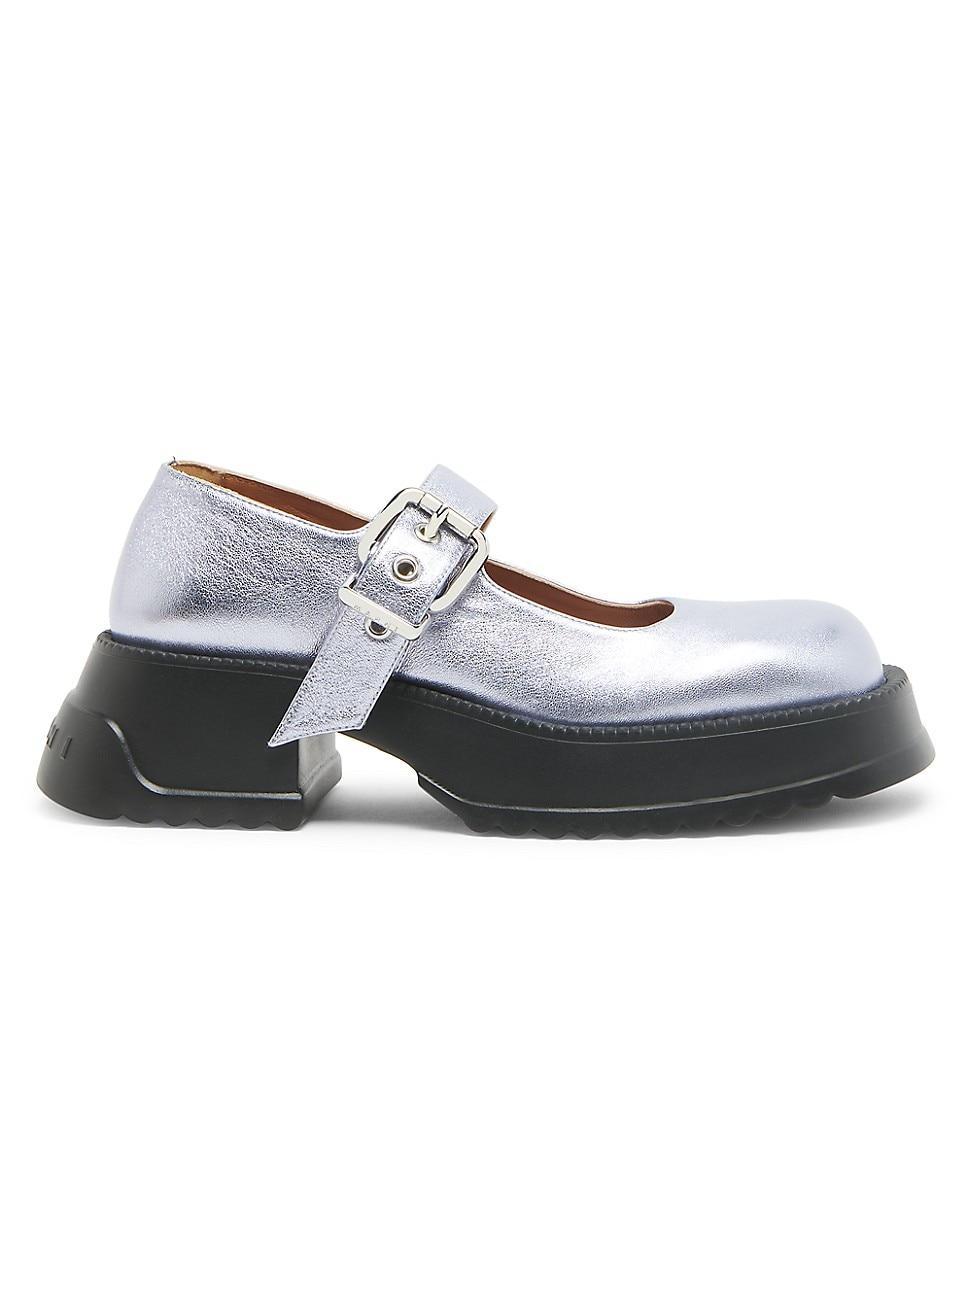 Womens 50MM Metallic Leather Buckle Mary Janes Product Image